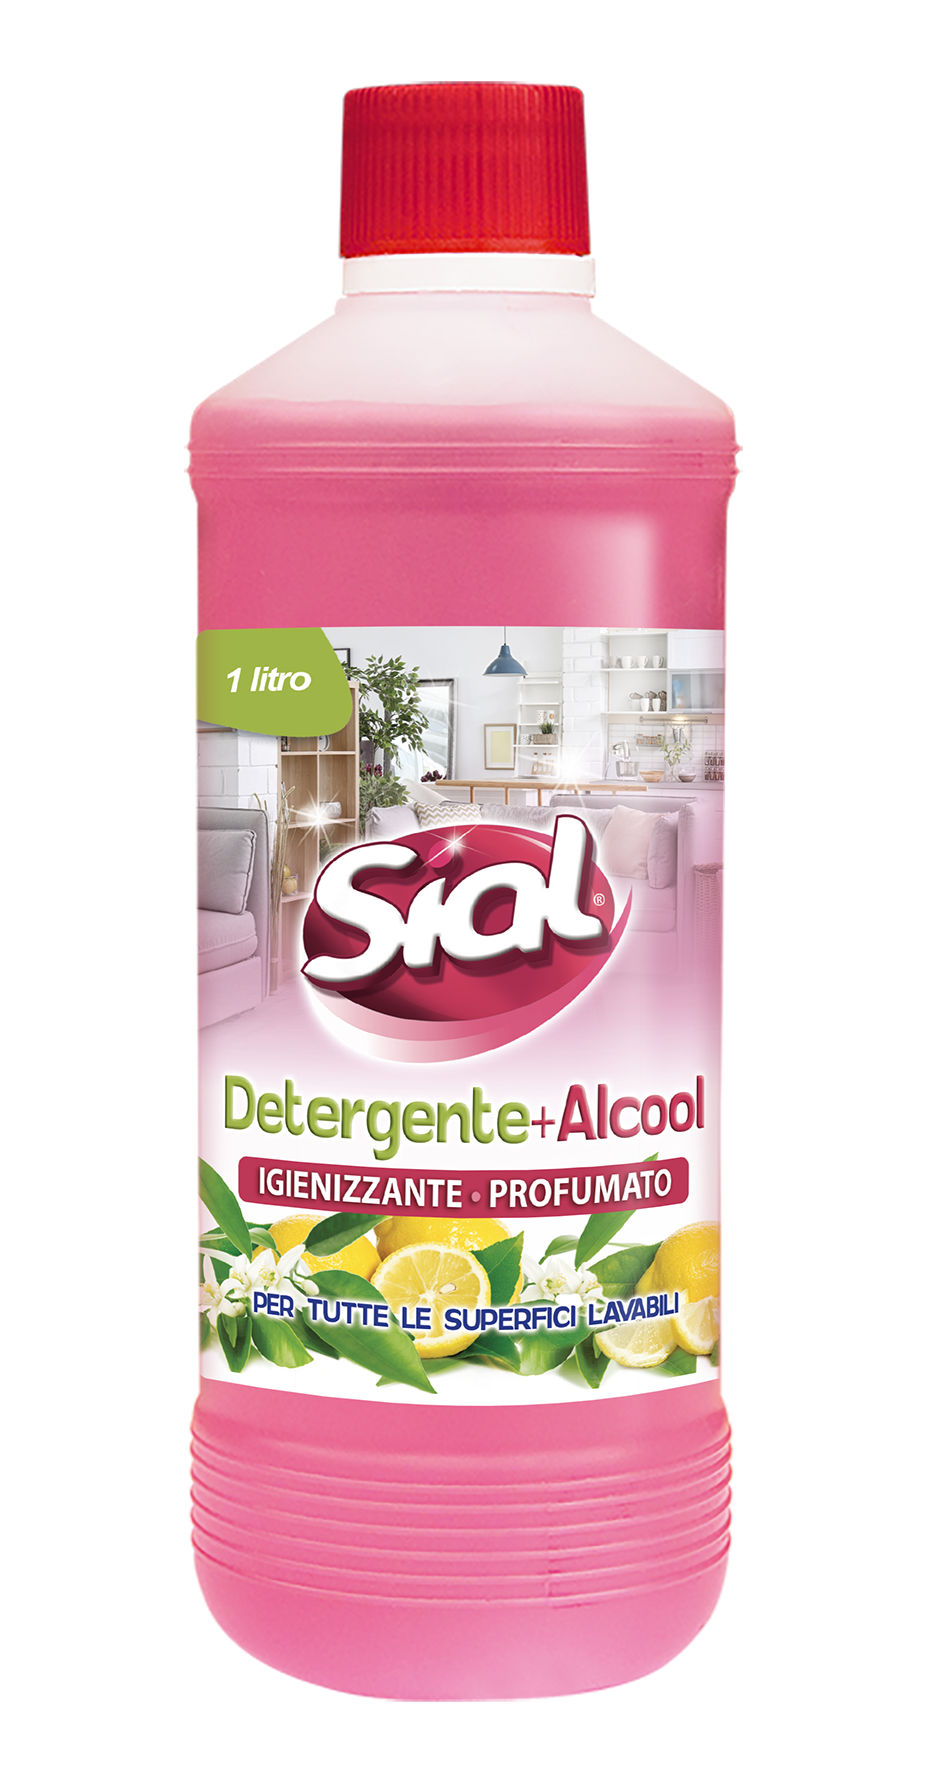 Sial Detergente+Alcool 1L – Sial Industrie Chimiche